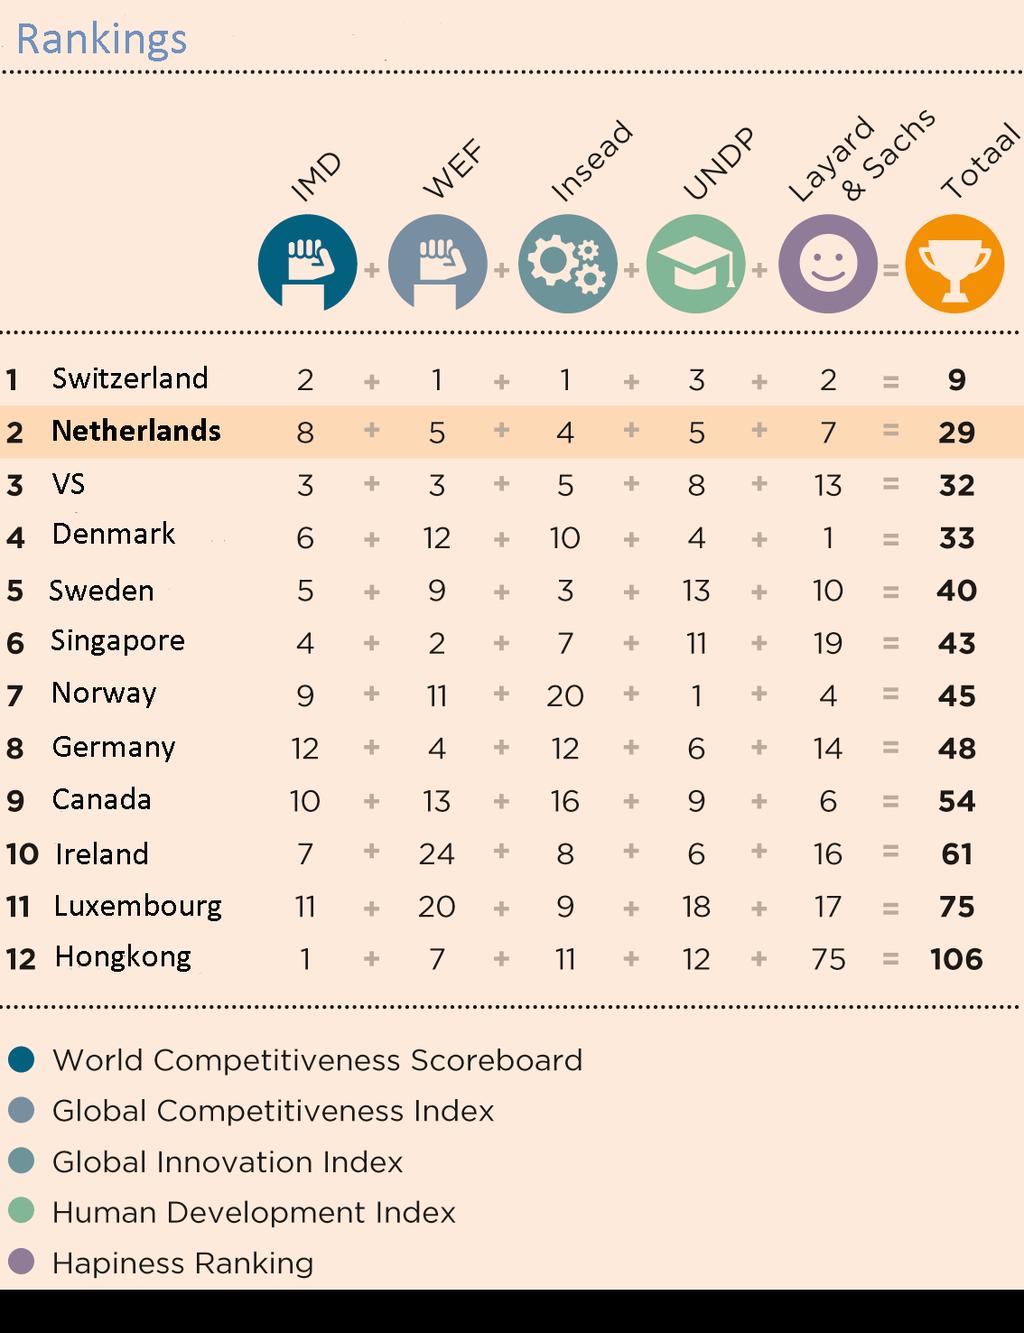 The Netherlands: Top overall ranking in business climate Based on its top position on five leading business rankings, the Netherlands ranks highest in the world after Switzerland.